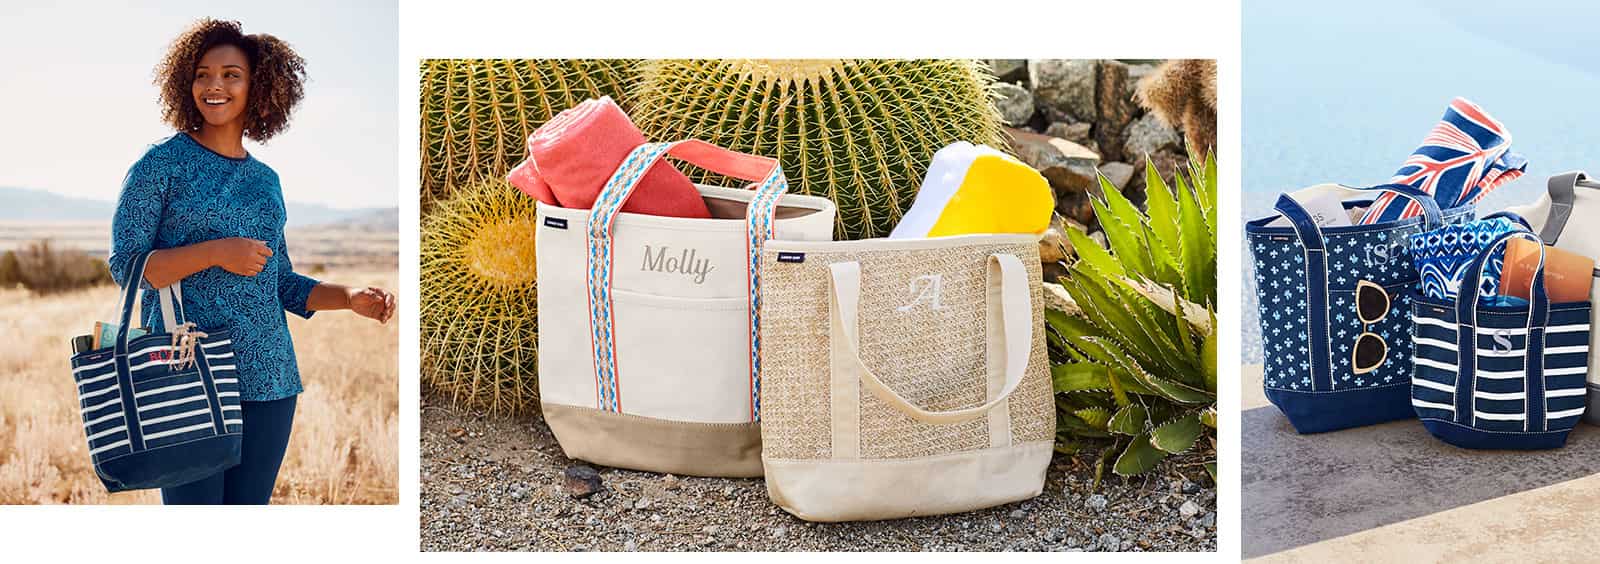 Tips on Finding the Best Beach Bag | Lands' End